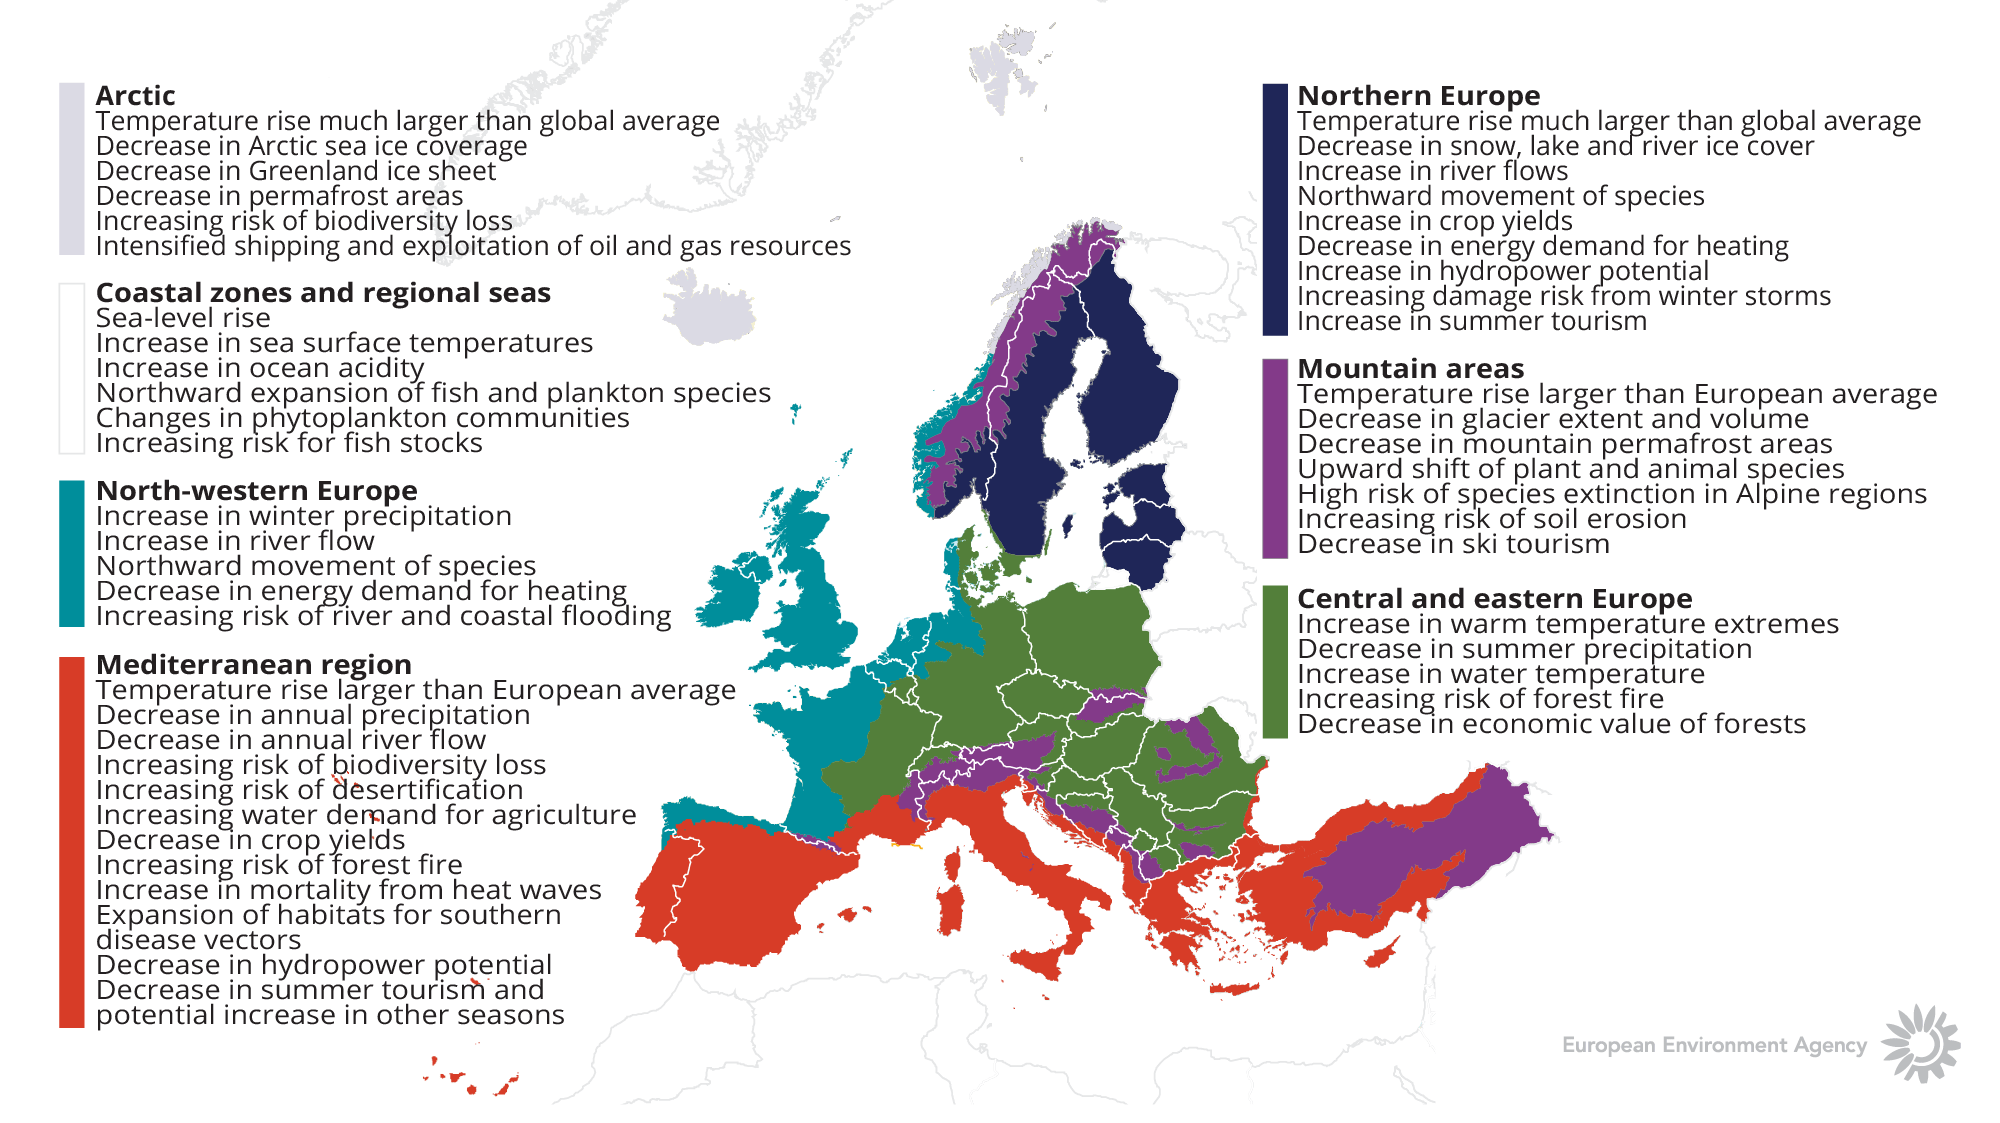 Climate change impacts in Europe